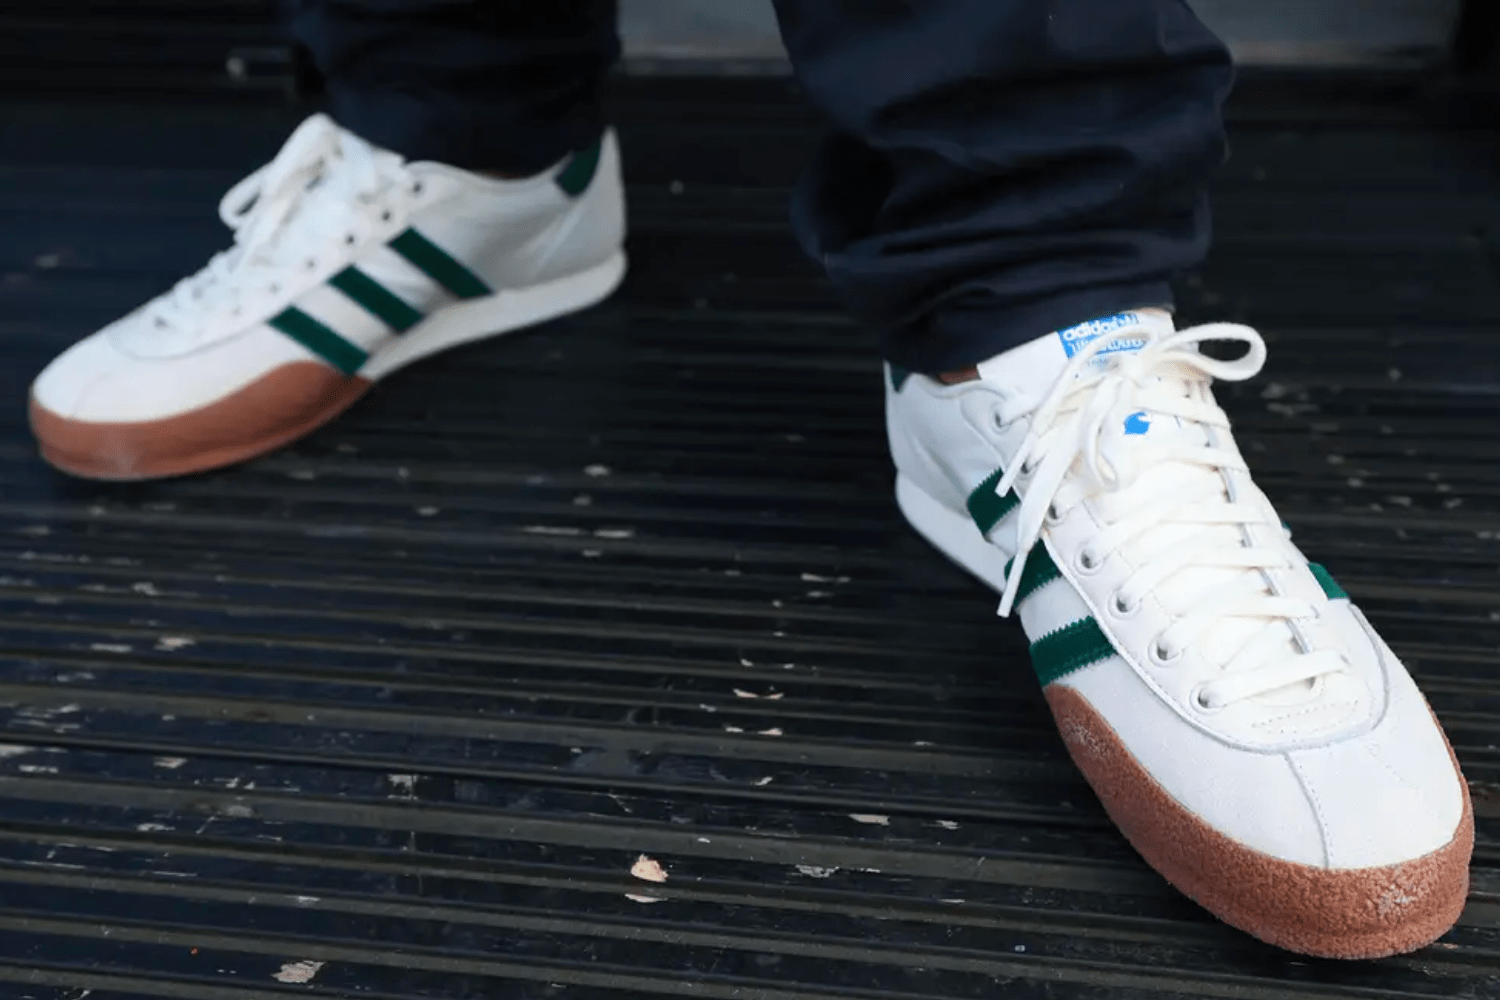 Liam Gallagher unveils 'Bottle Green' colorway for the adidas LG2 SPZL